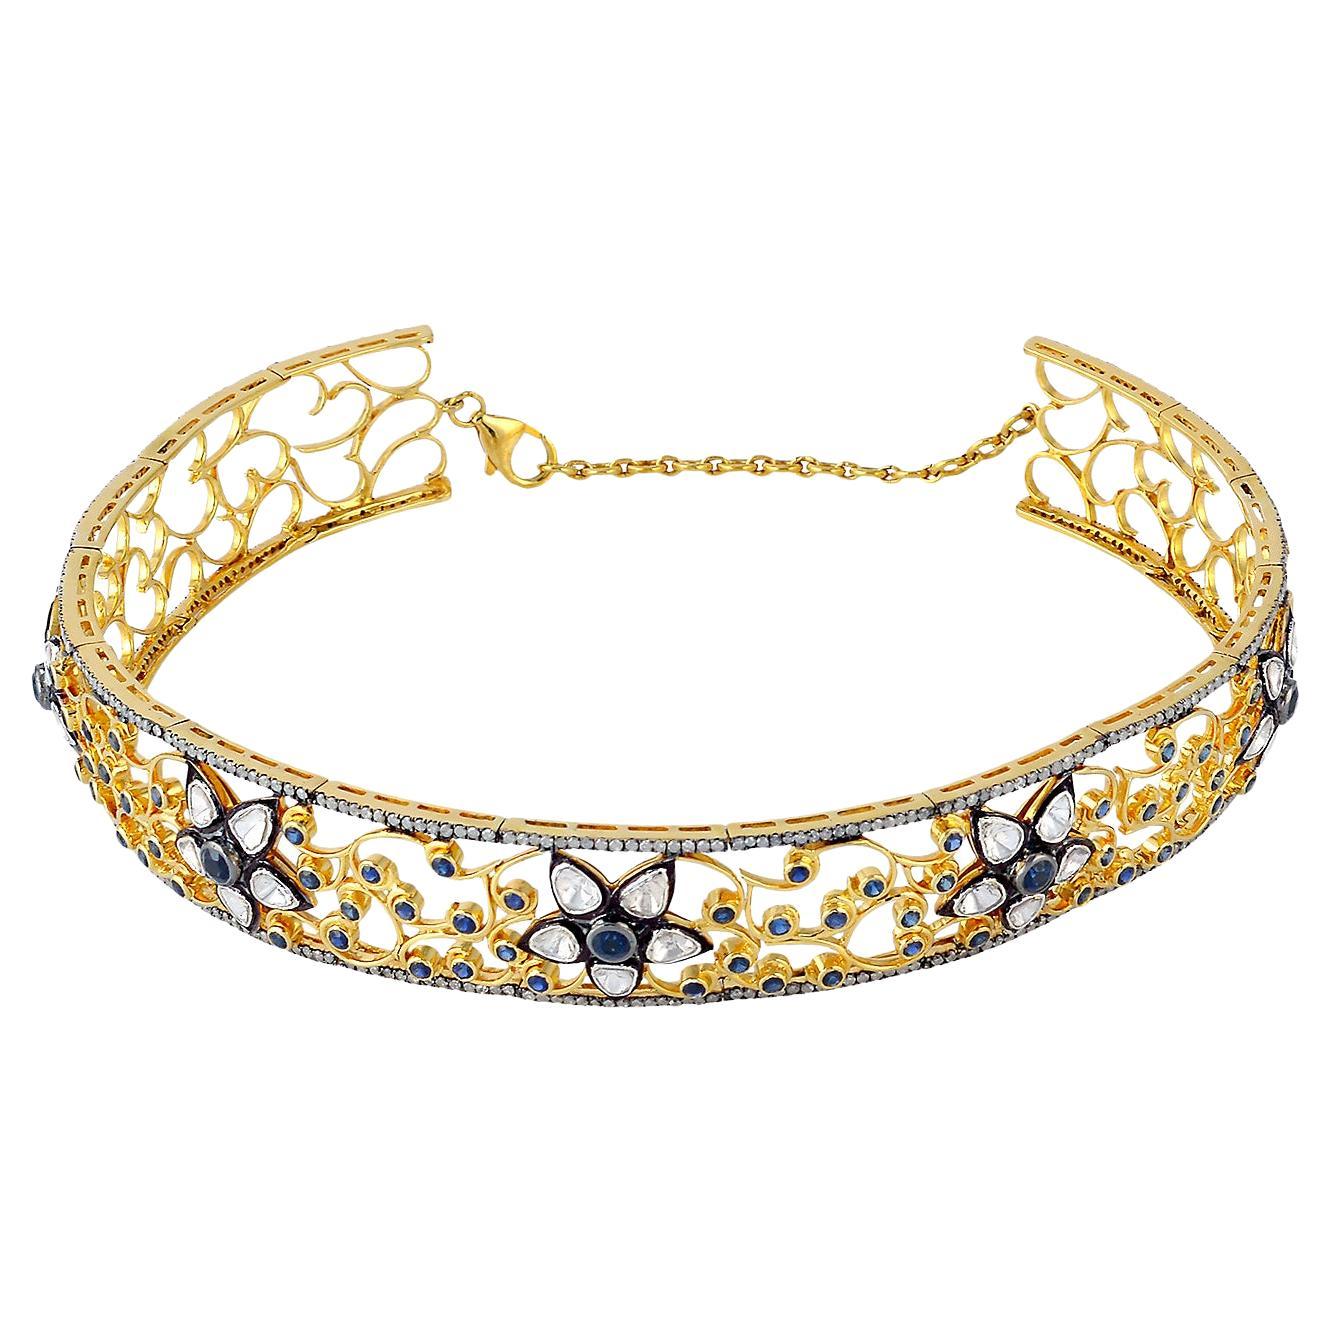 Filigree Designed Choker Necklace in 18k Gold & Silver with Diamonds & Sapphires For Sale